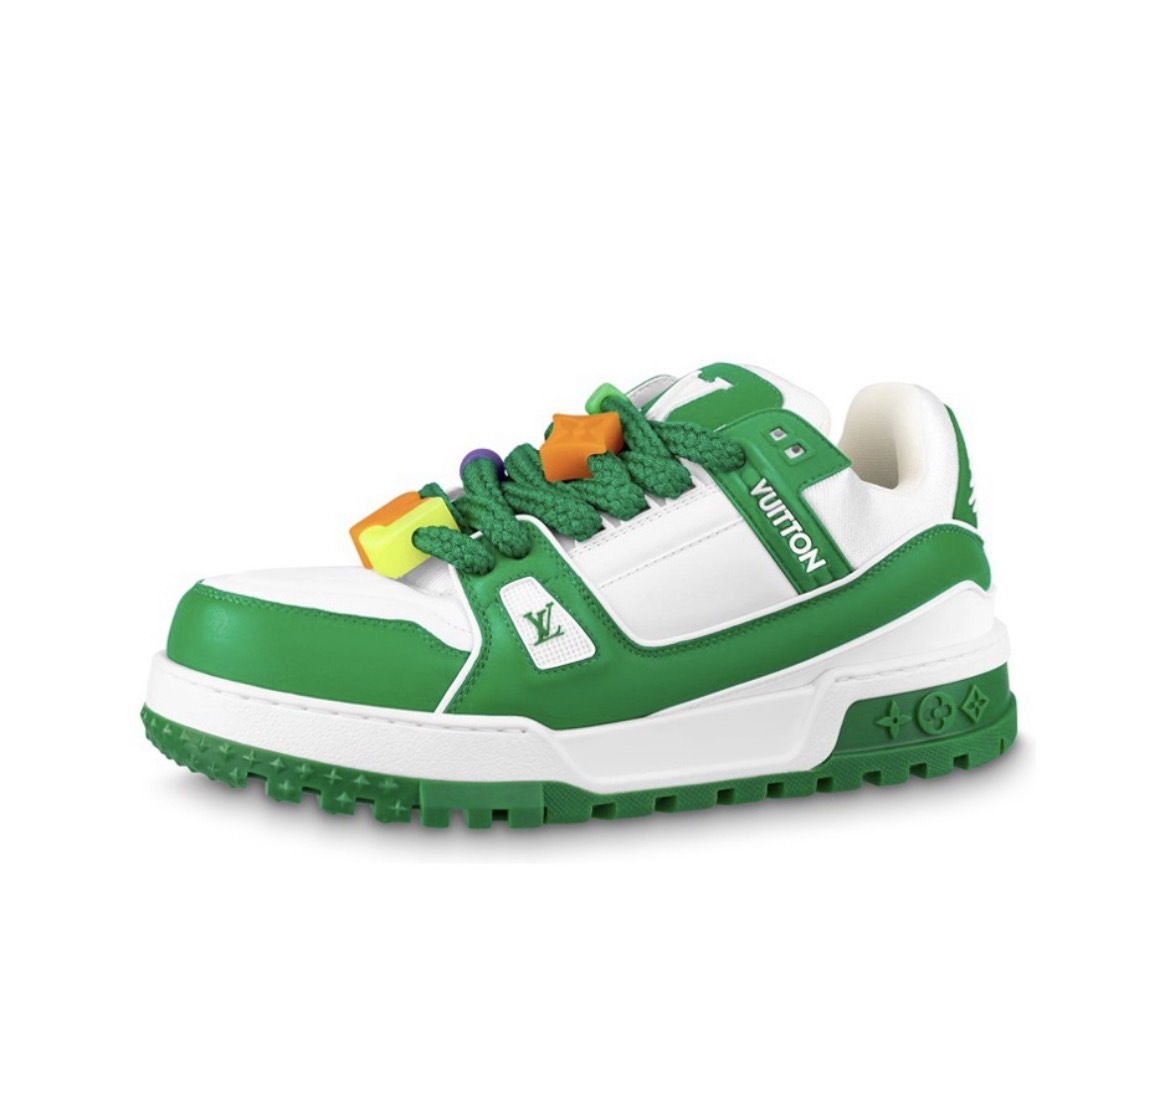 LV TRAINER MAXI New Candy Chubby Shoes Green Louis Vuit